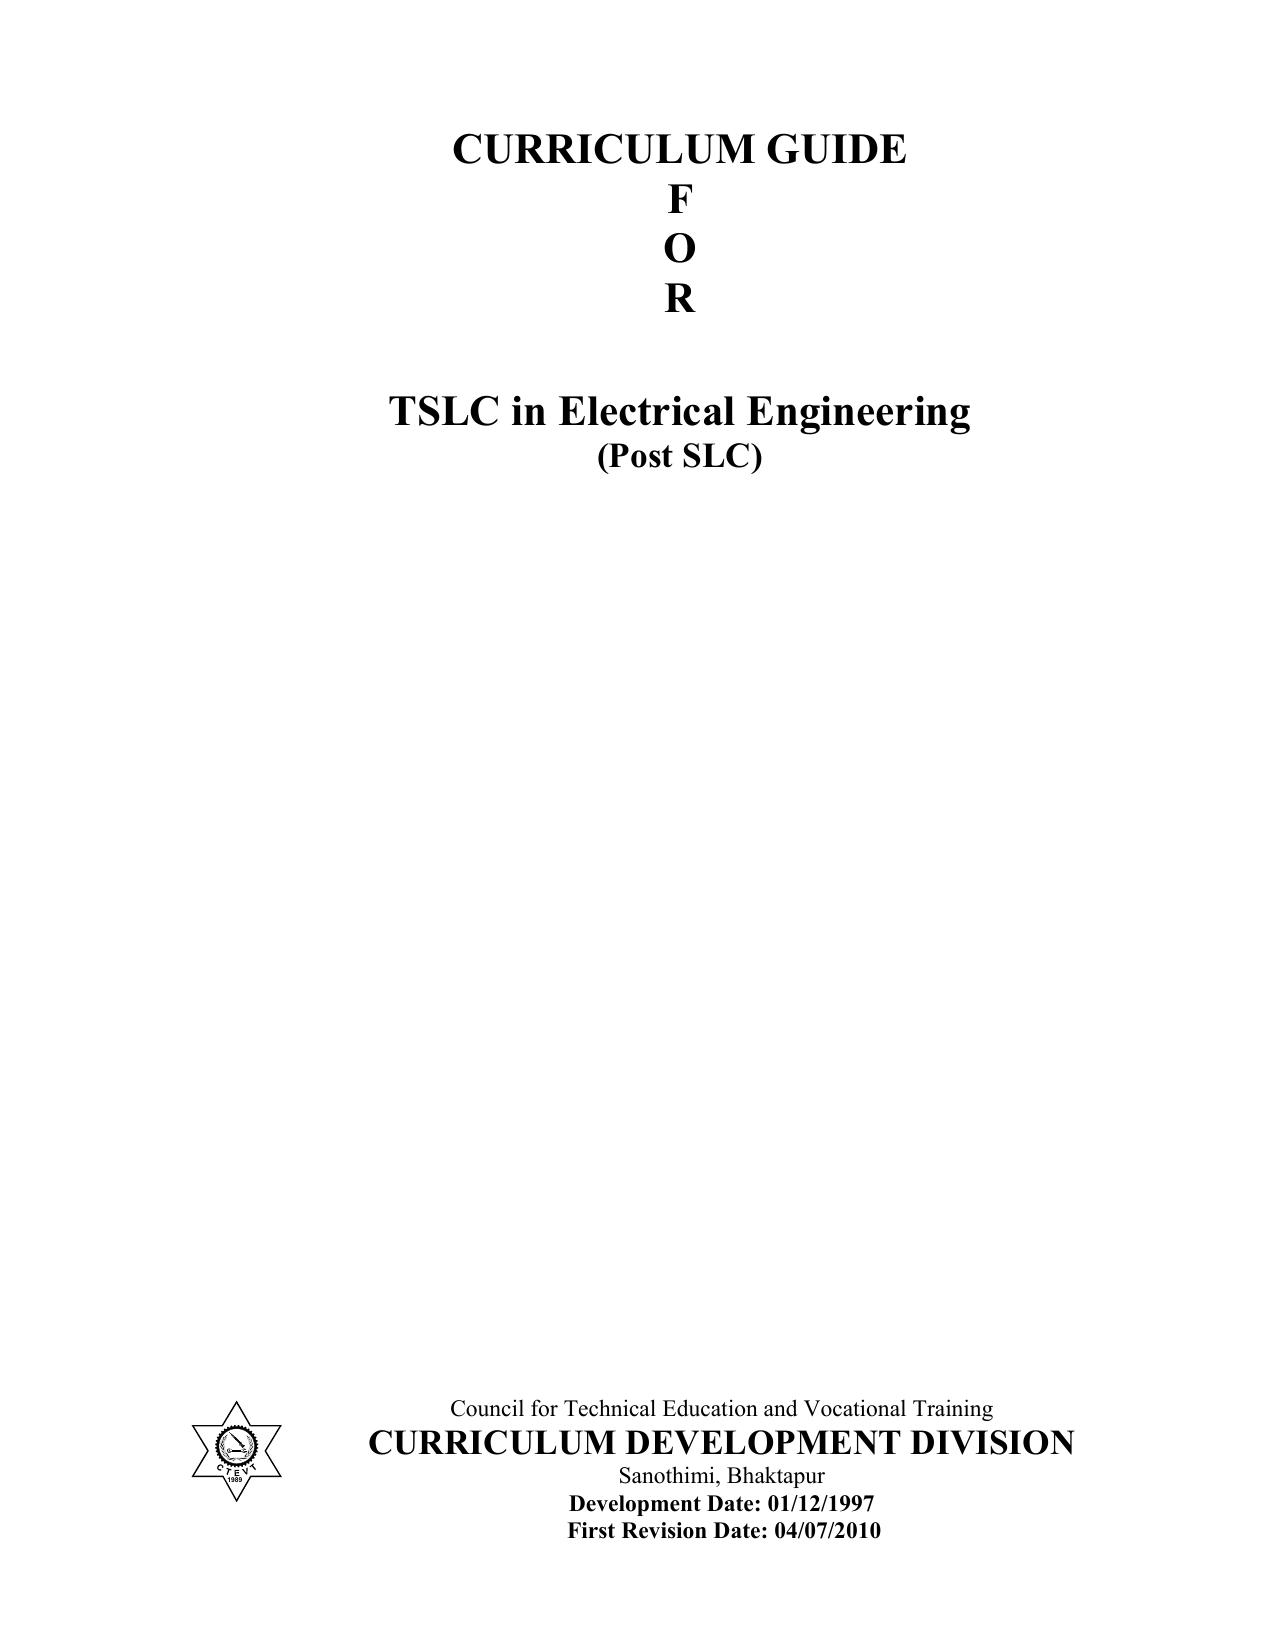 TSLC in Electrical engineering Post SLC, 2010